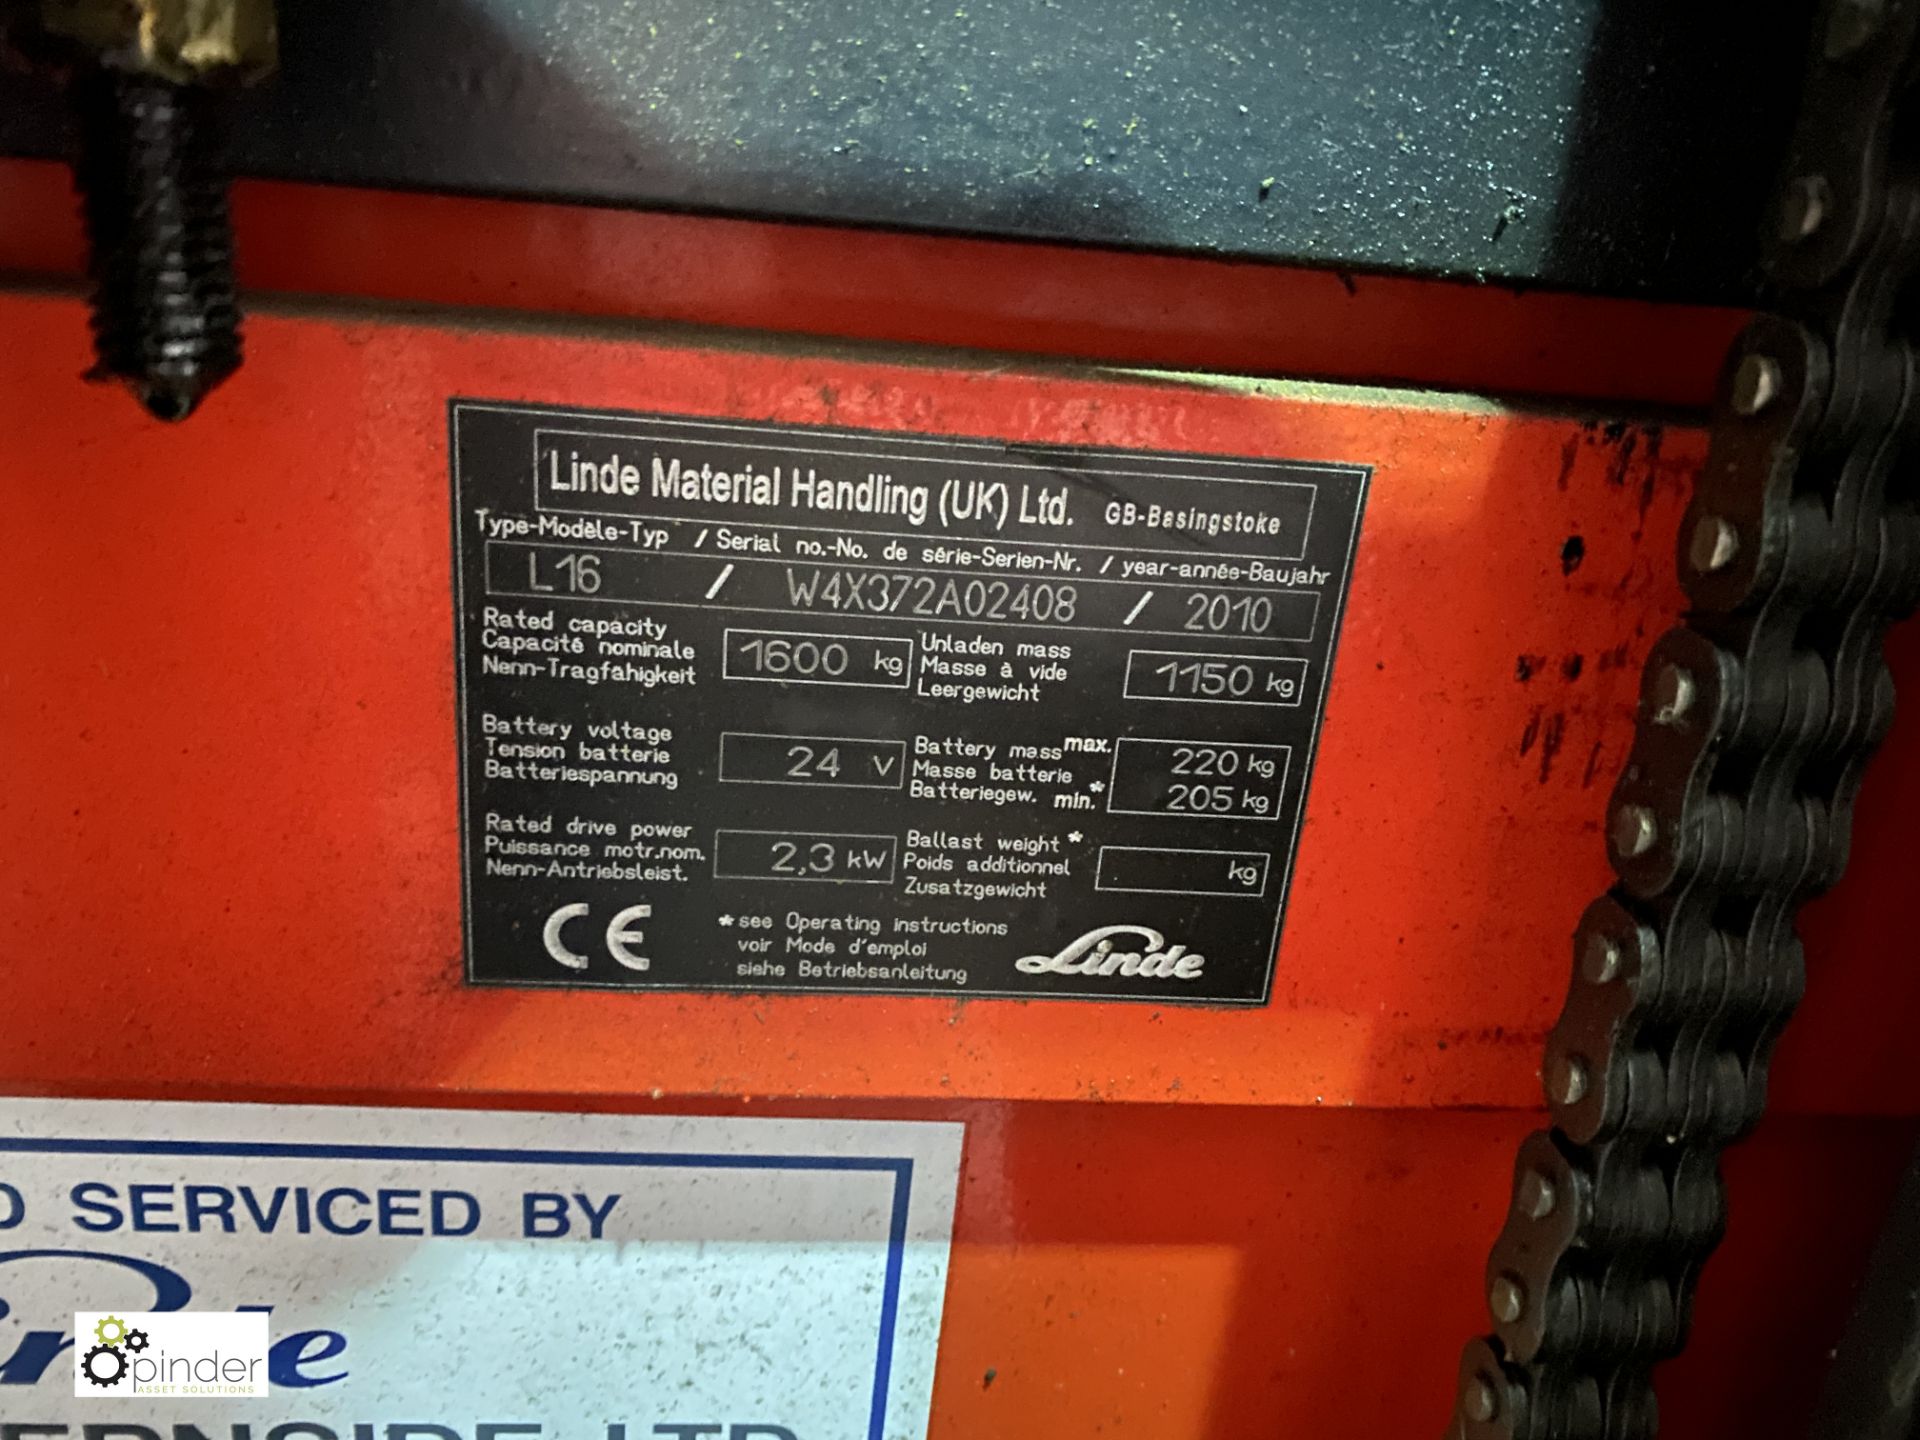 Linde L16 electric pedestrian Forklift Truck, 1600kg capacity, year 2010, not in working order - Image 7 of 9